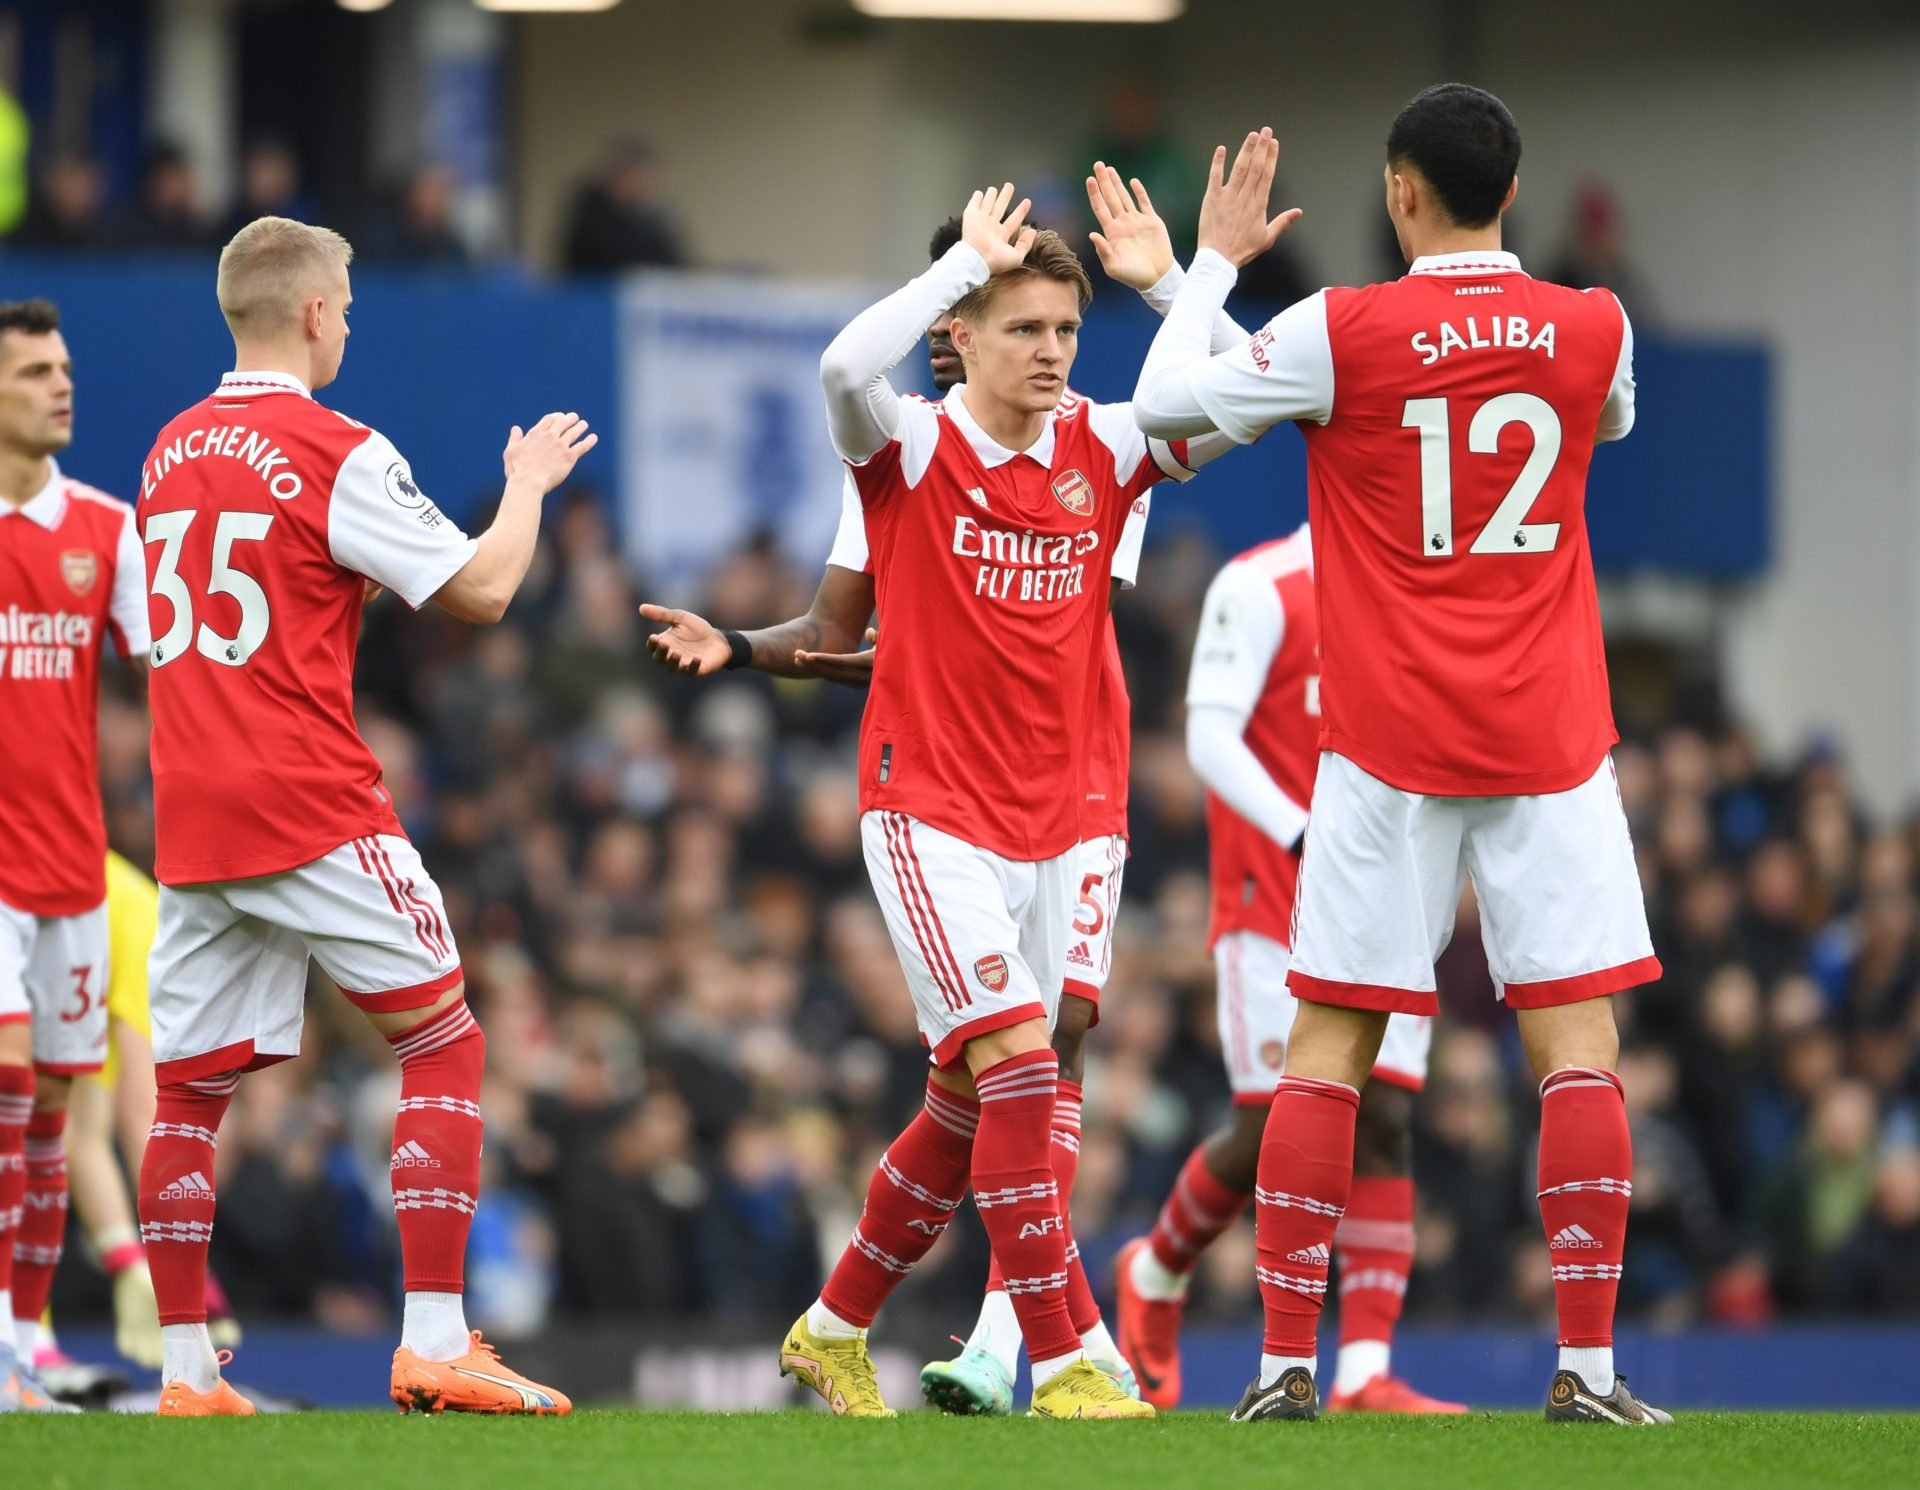 Arsenal stay top of the Premier League with dominant display against Leicester